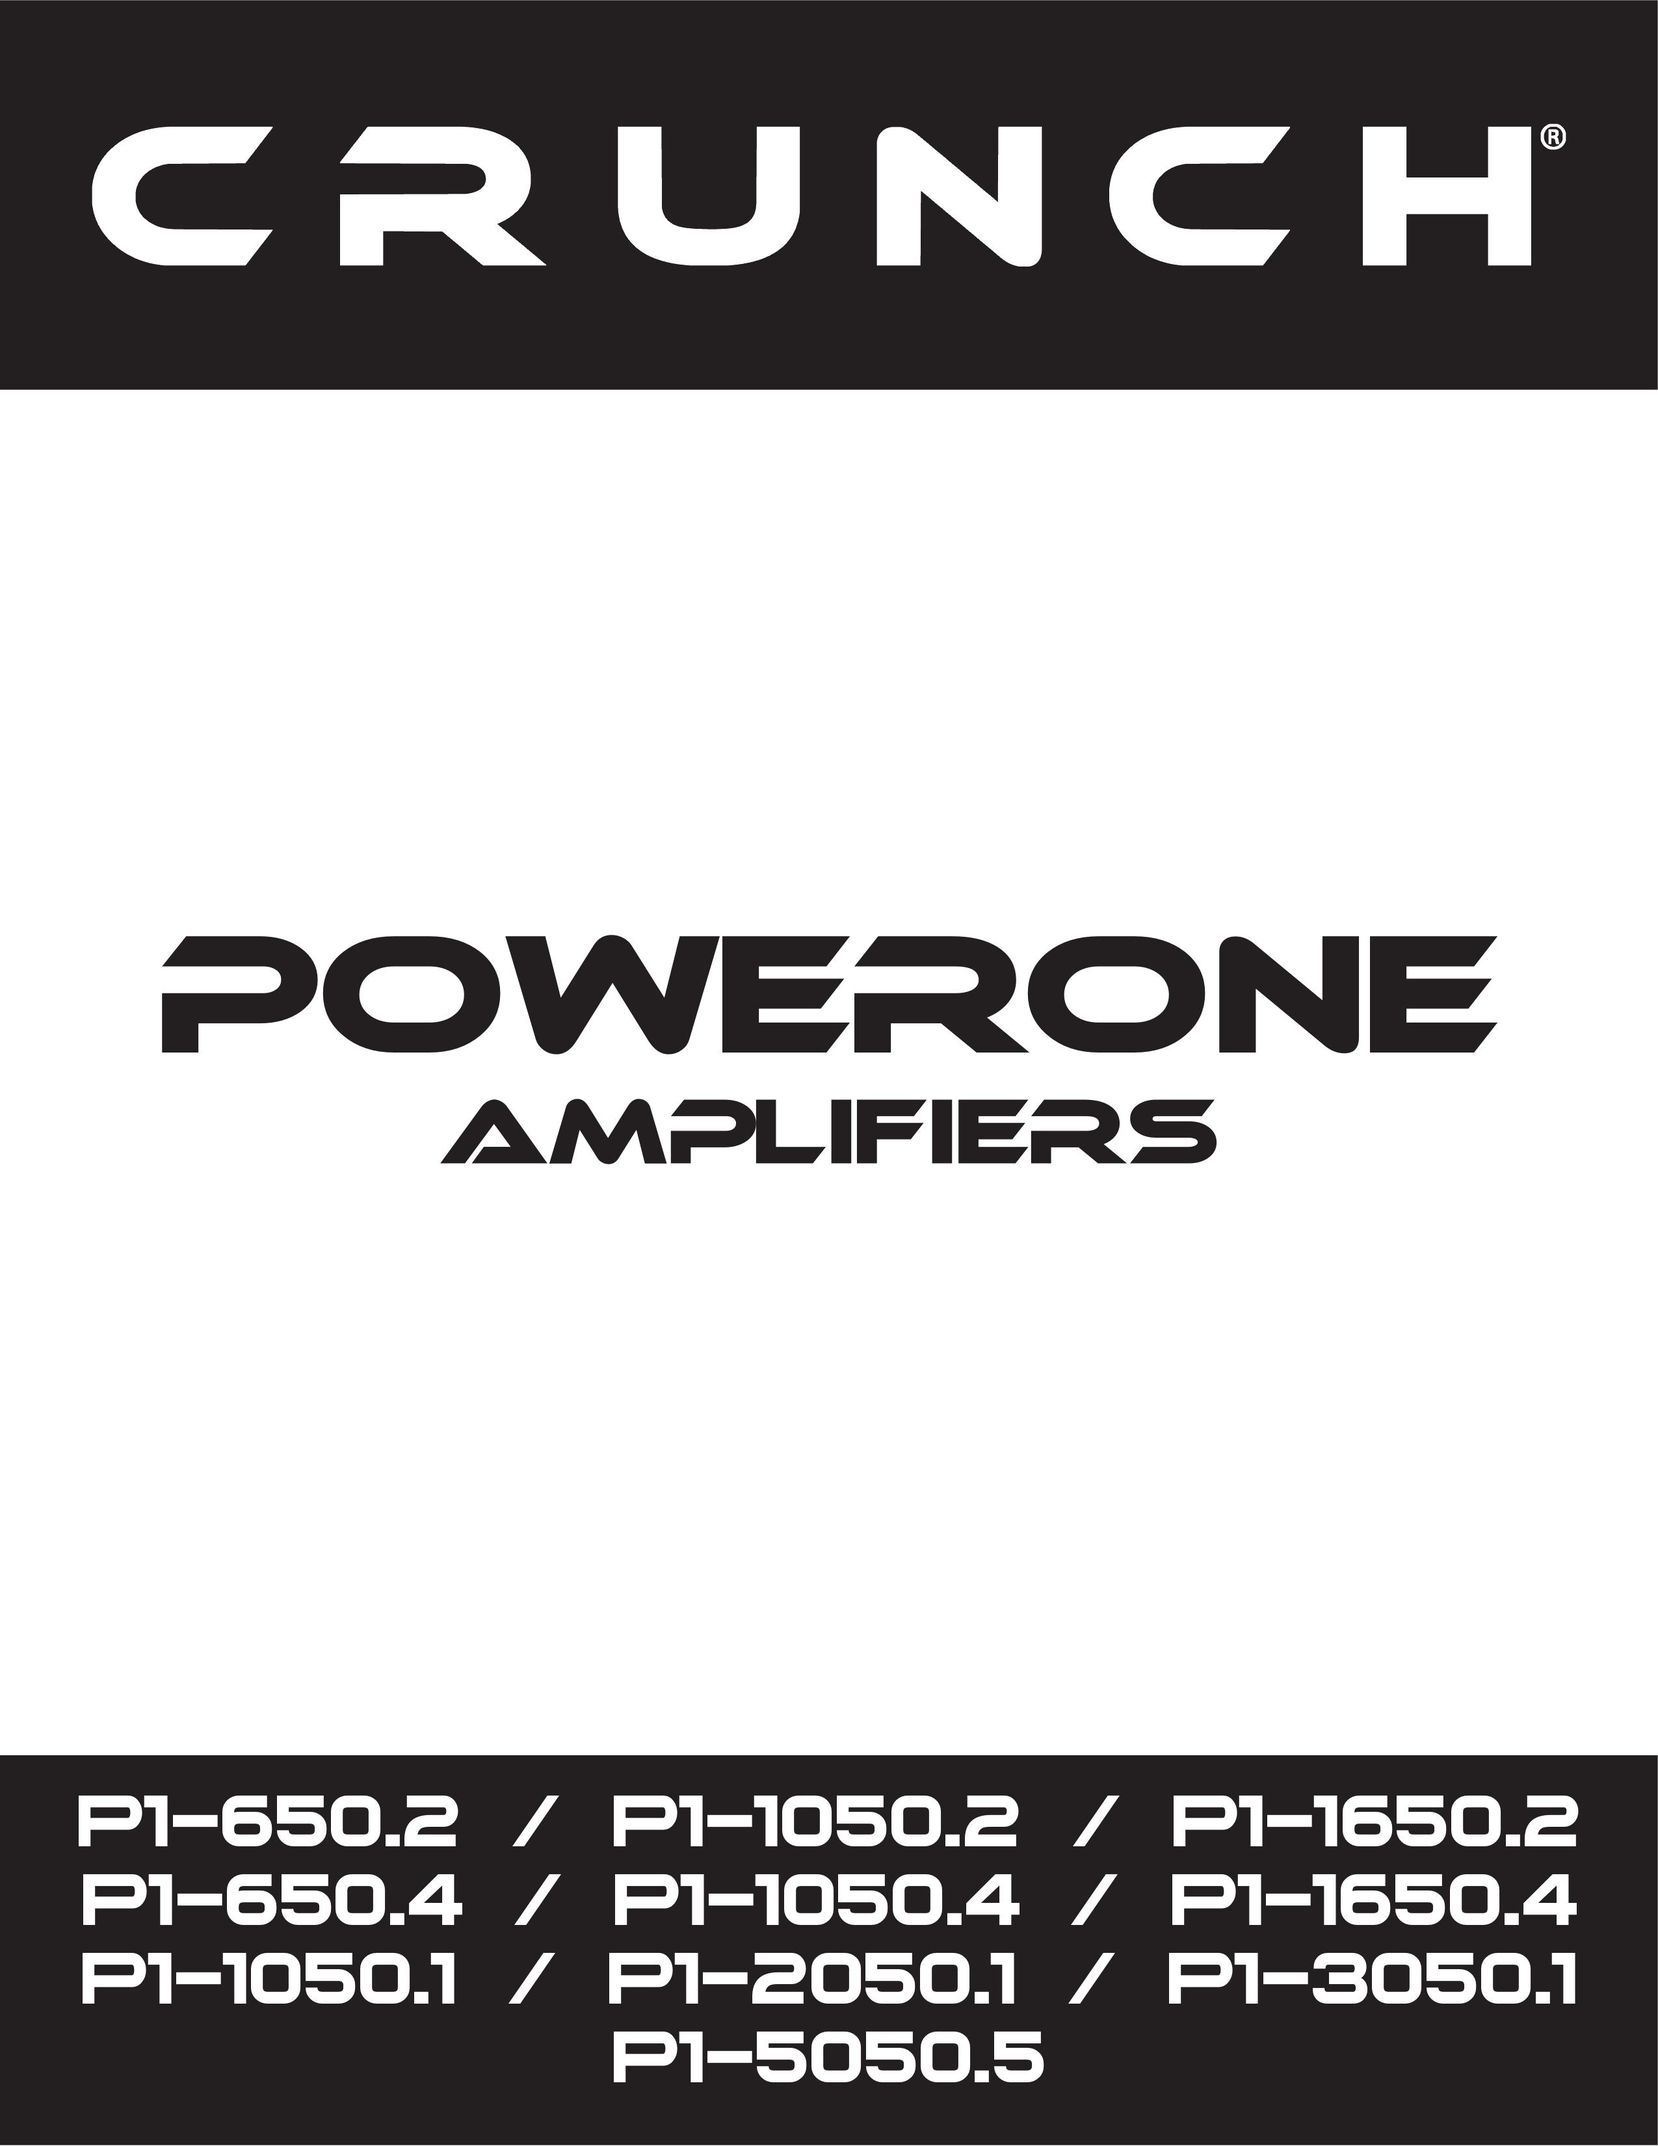 Crunch P1-3050.1 Stereo Amplifier User Manual